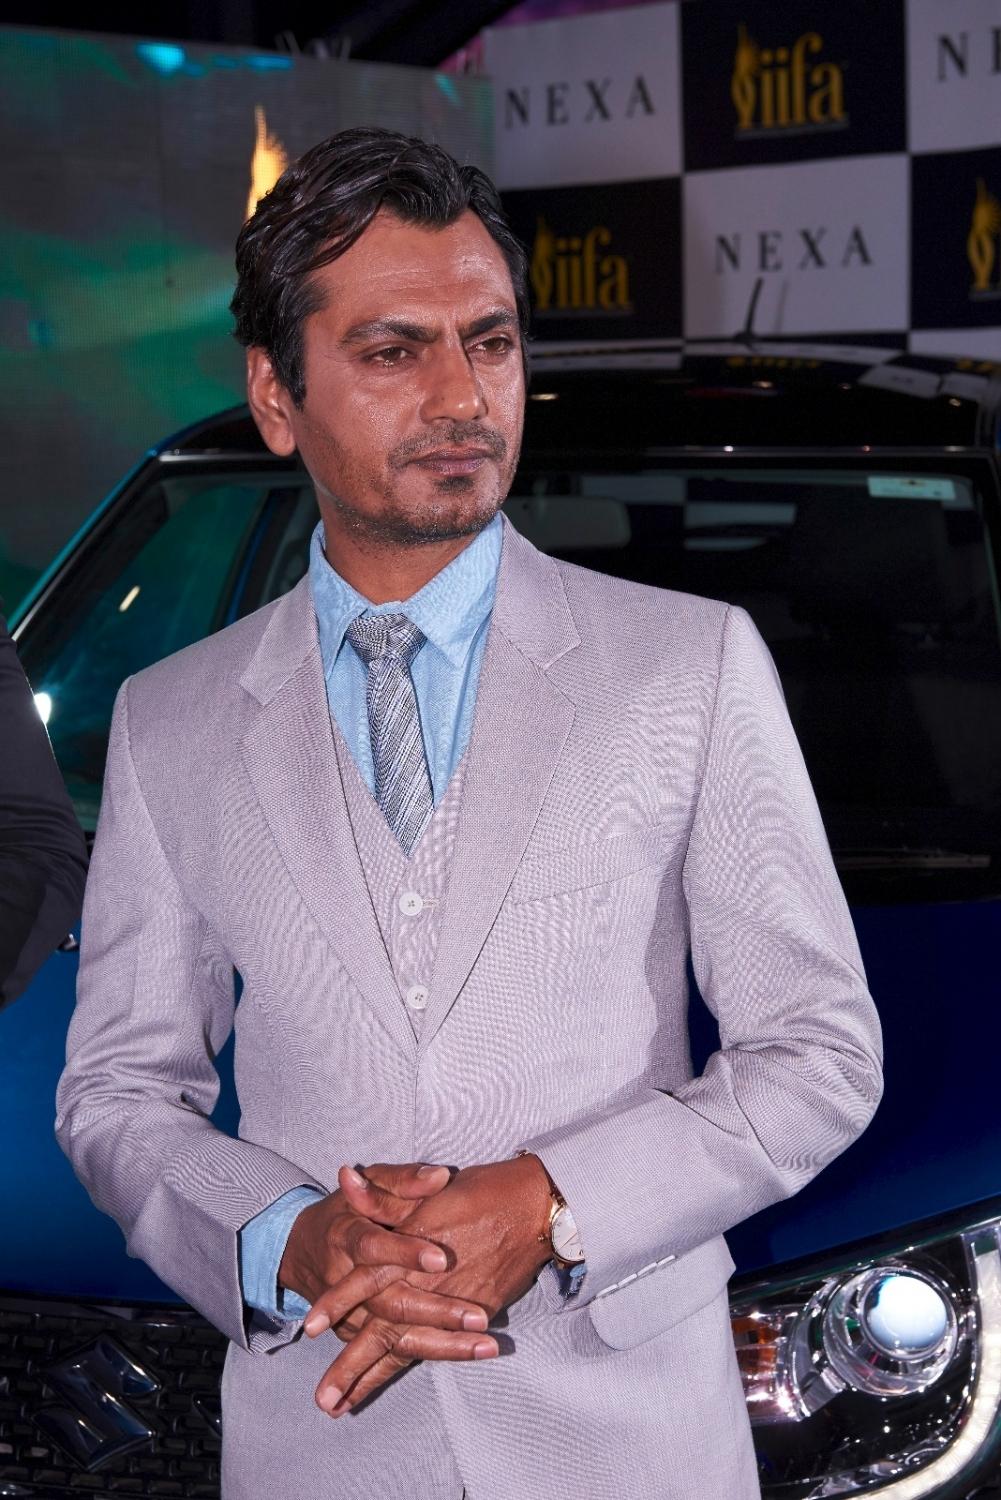 Nawazuddin’s cryptic message hints at racism in film industry